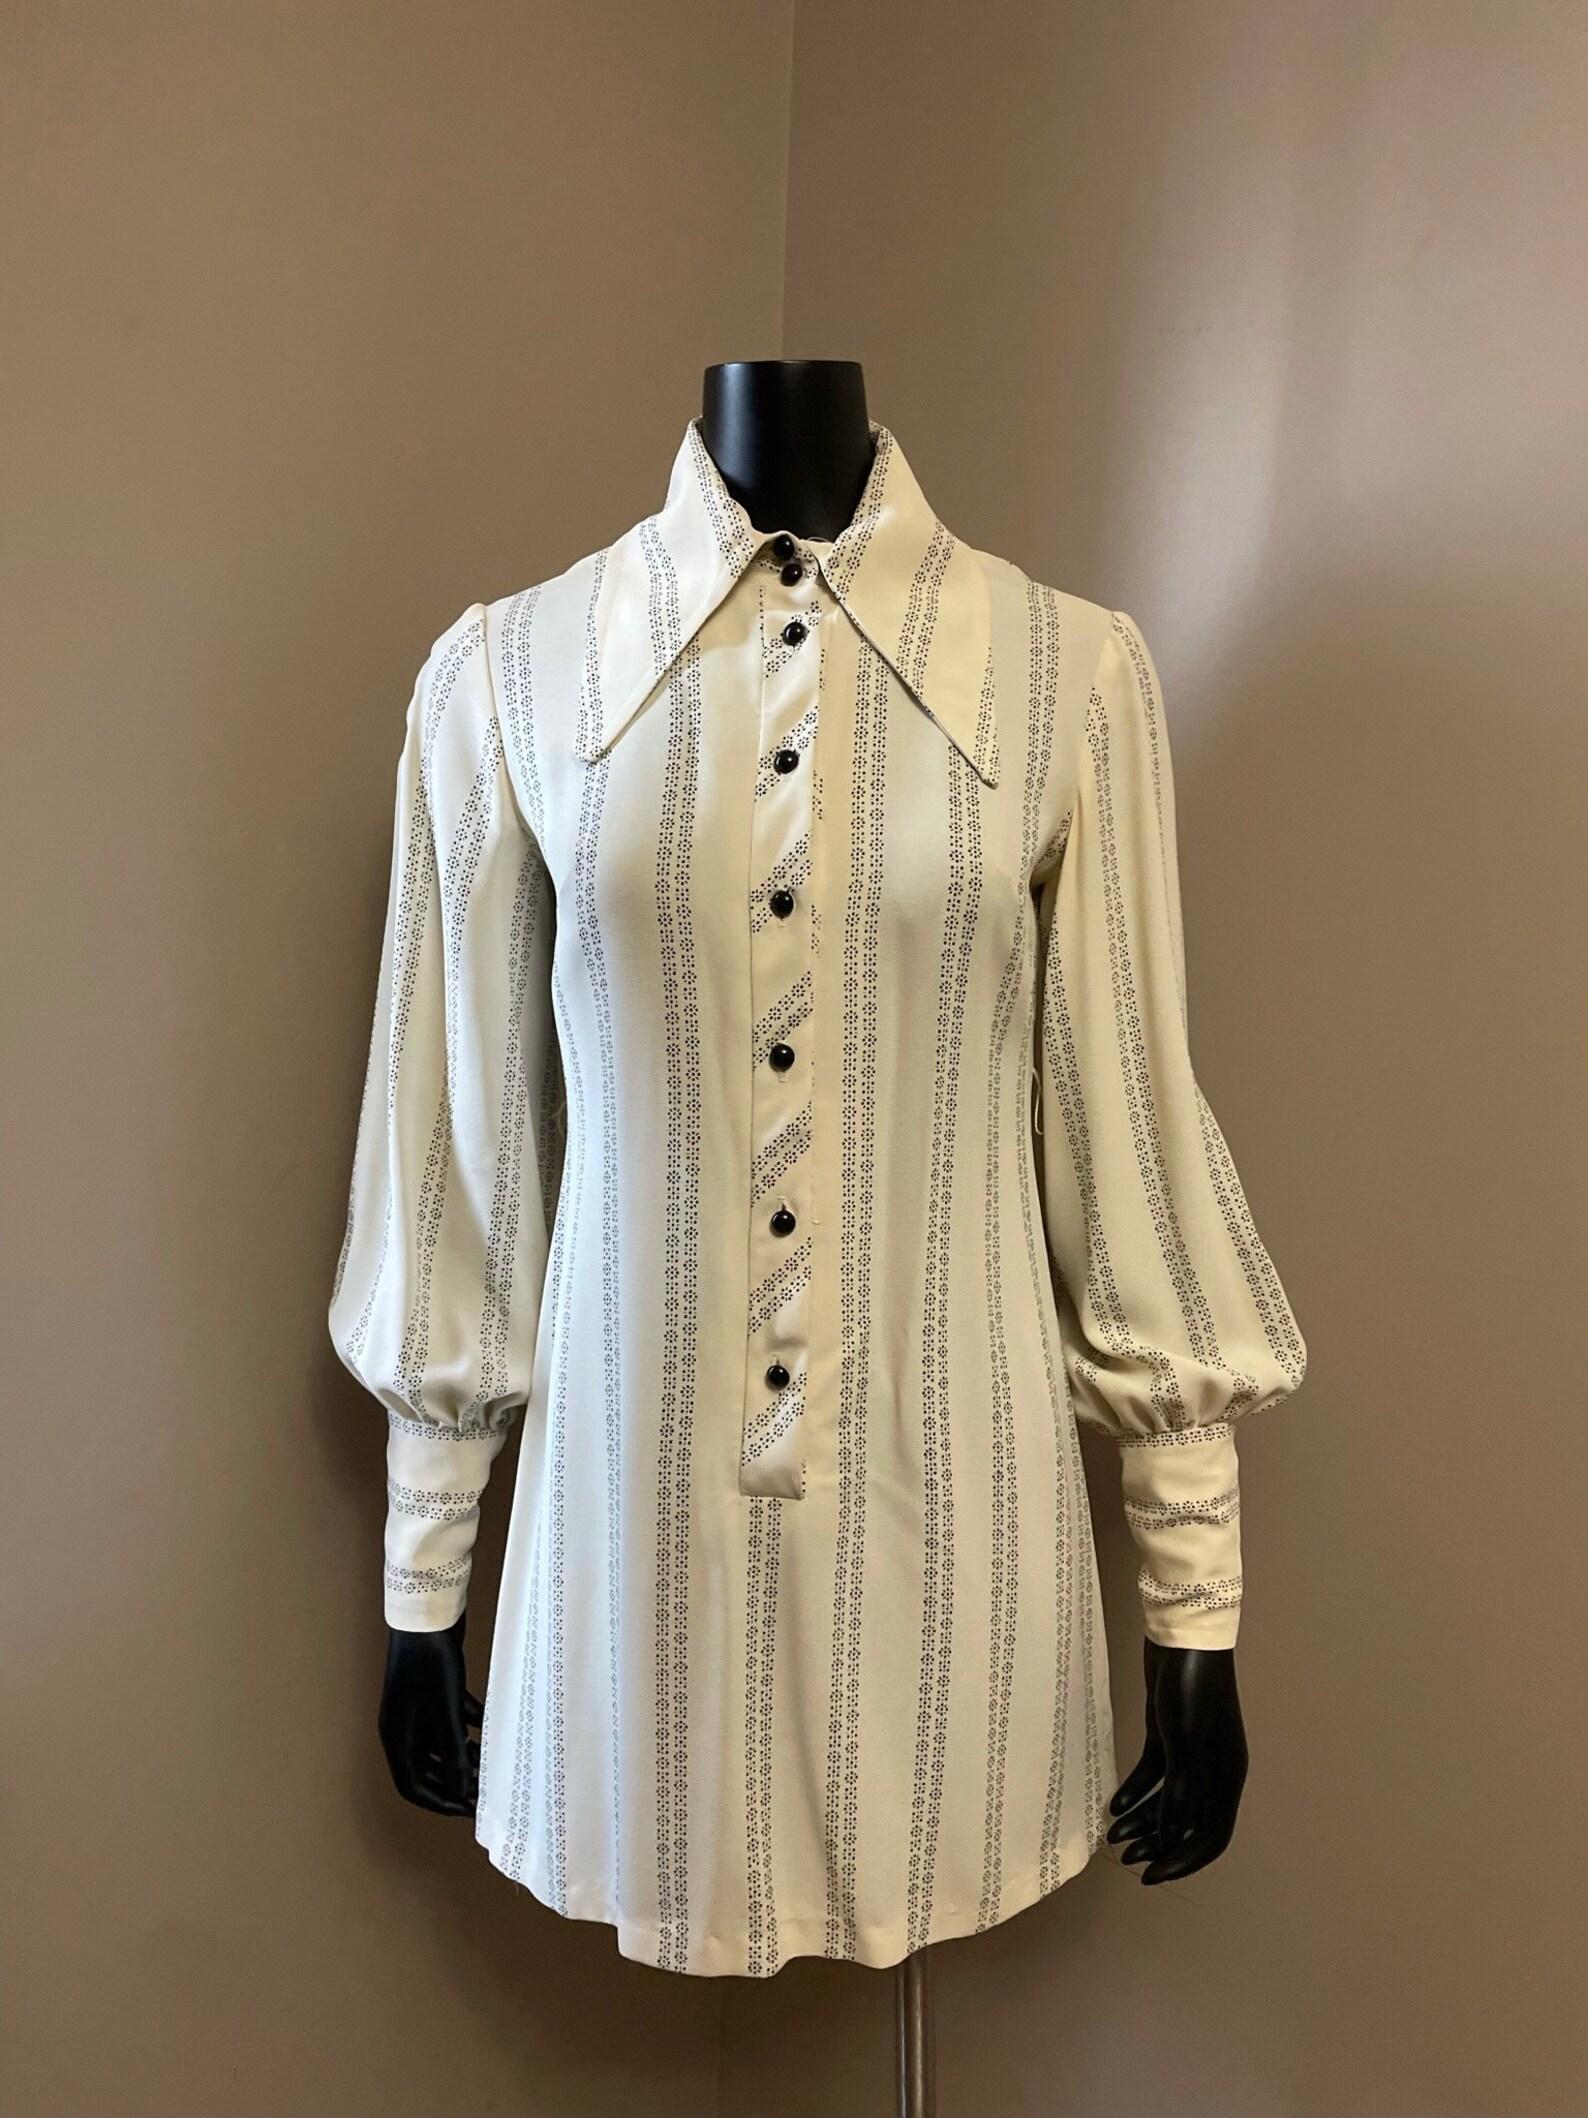 1970s cream and black micro mini dress In Excellent Condition For Sale In Brooklyn, NY